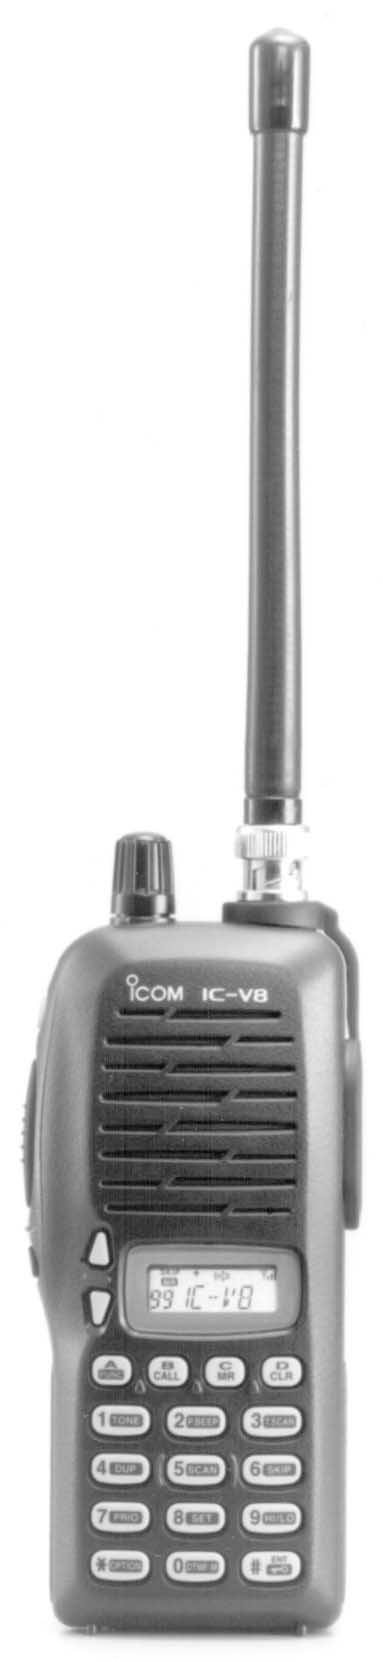 INSTRUCTION MANUAL VH TRANSCEIVER iv8 This device complies with Part 15 of the CC rules.